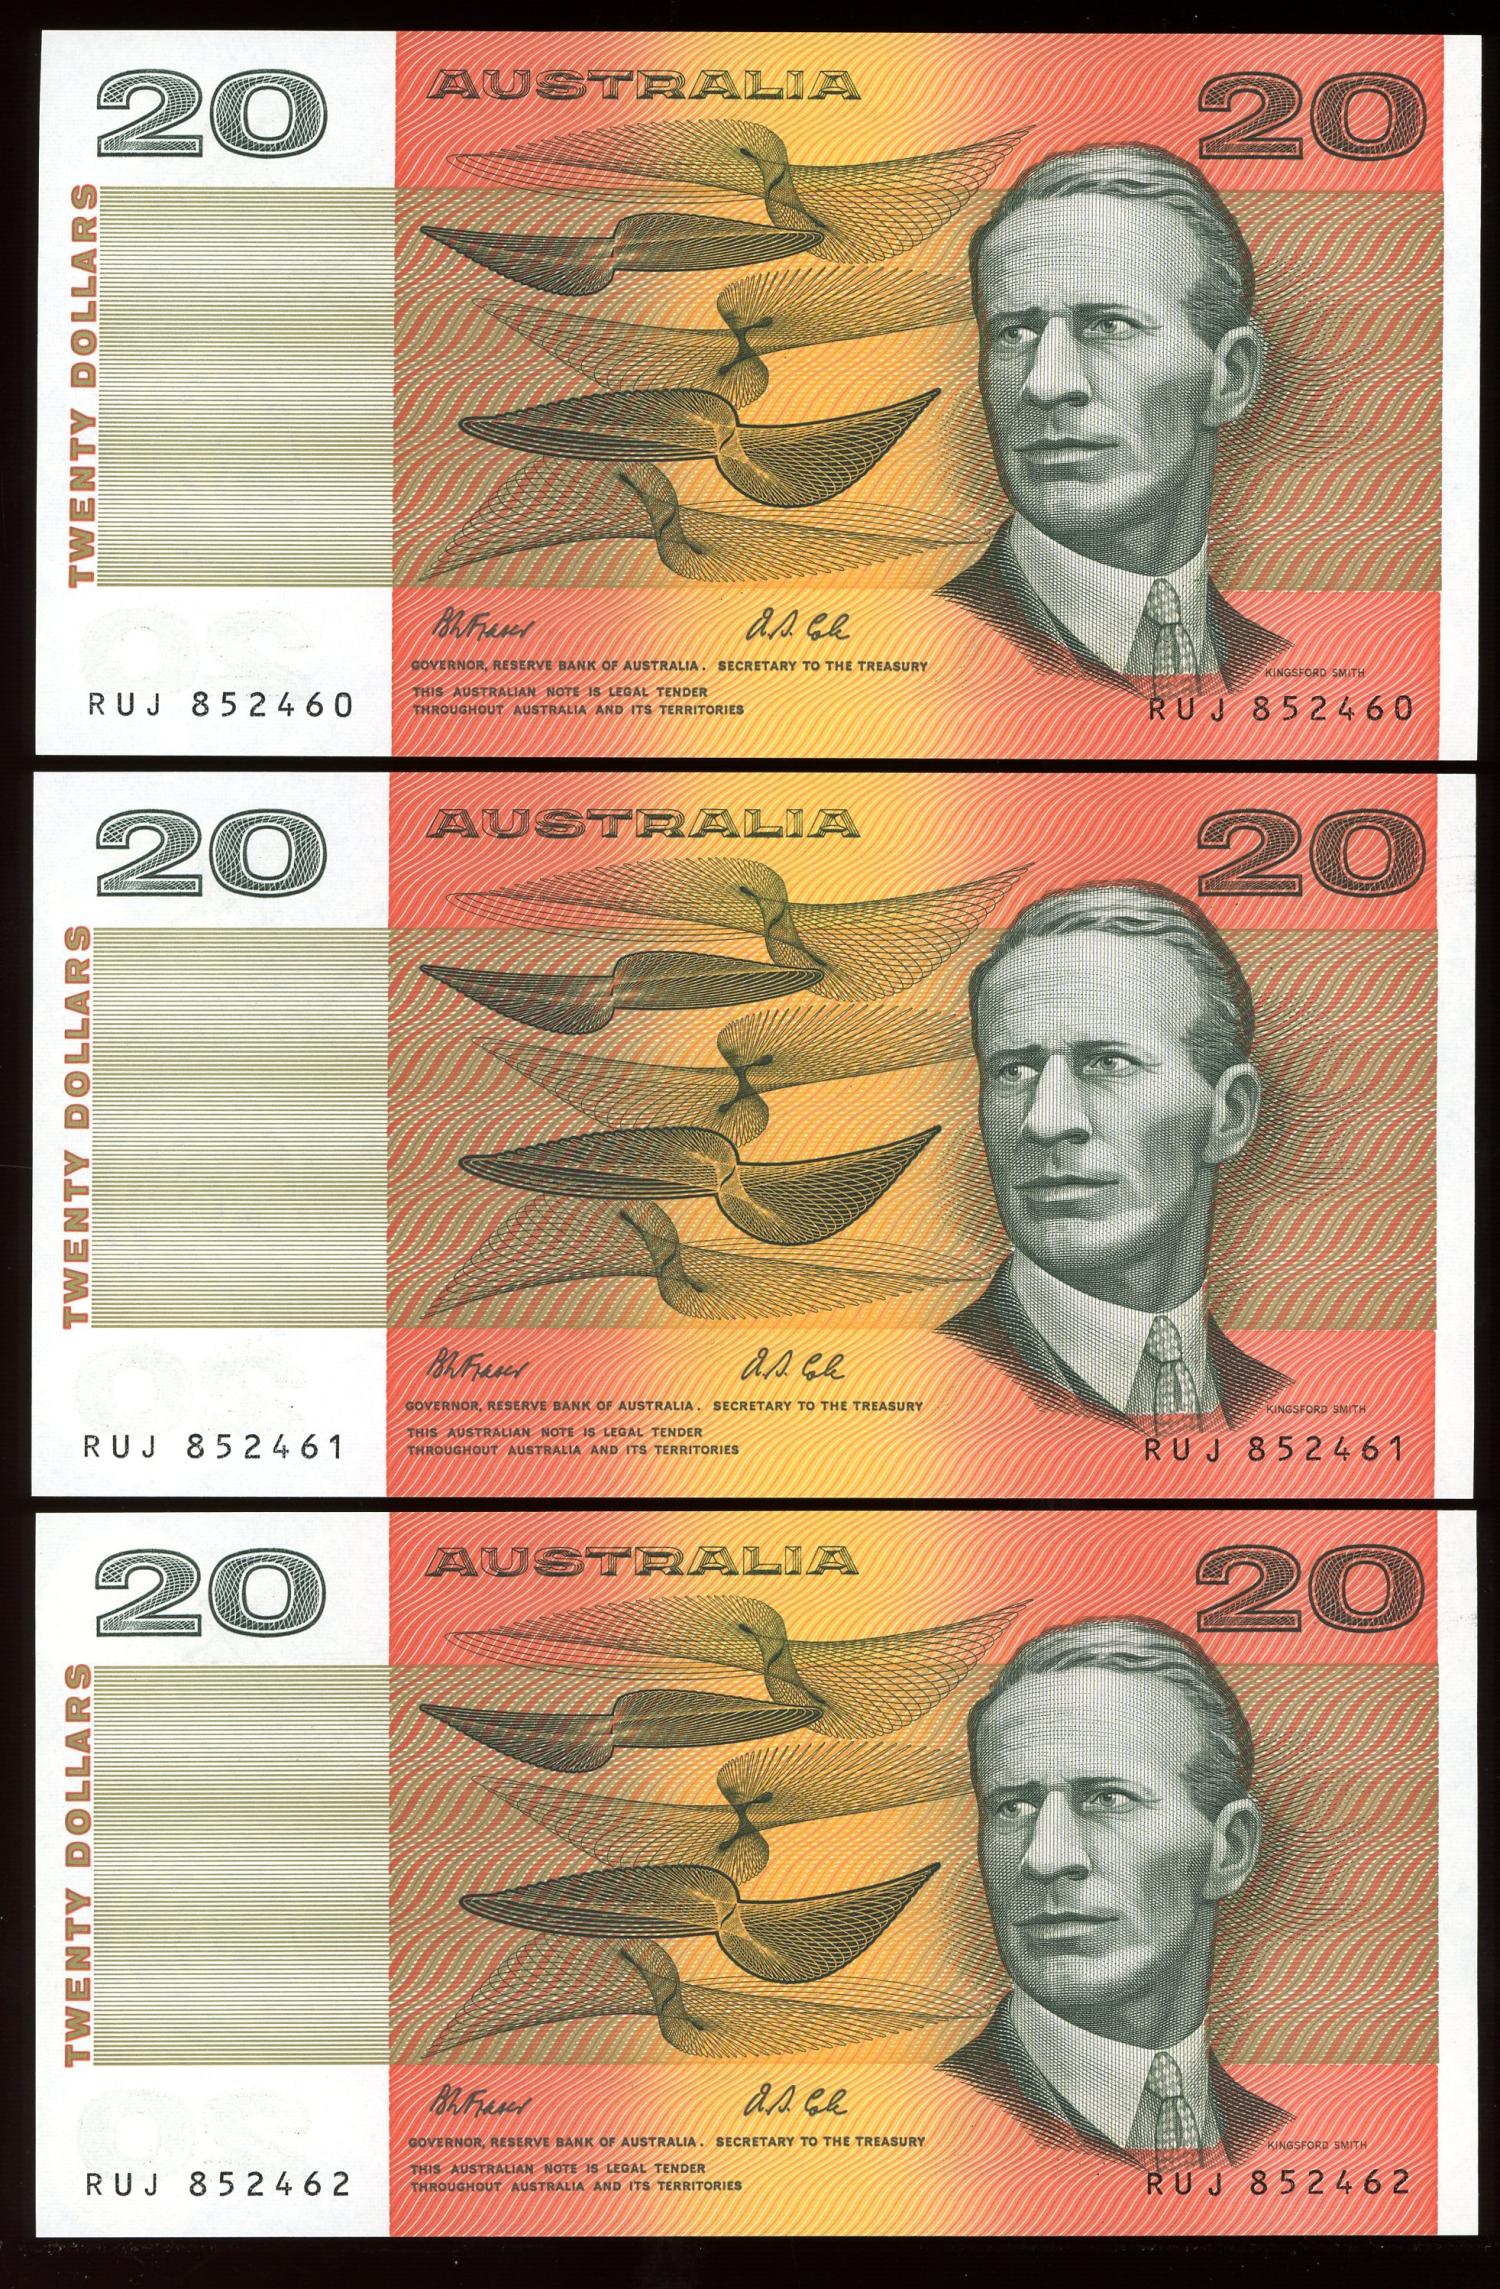 Thumbnail for 1991 $20 Trio Fraser Cole RUJ 852460-62 UNC